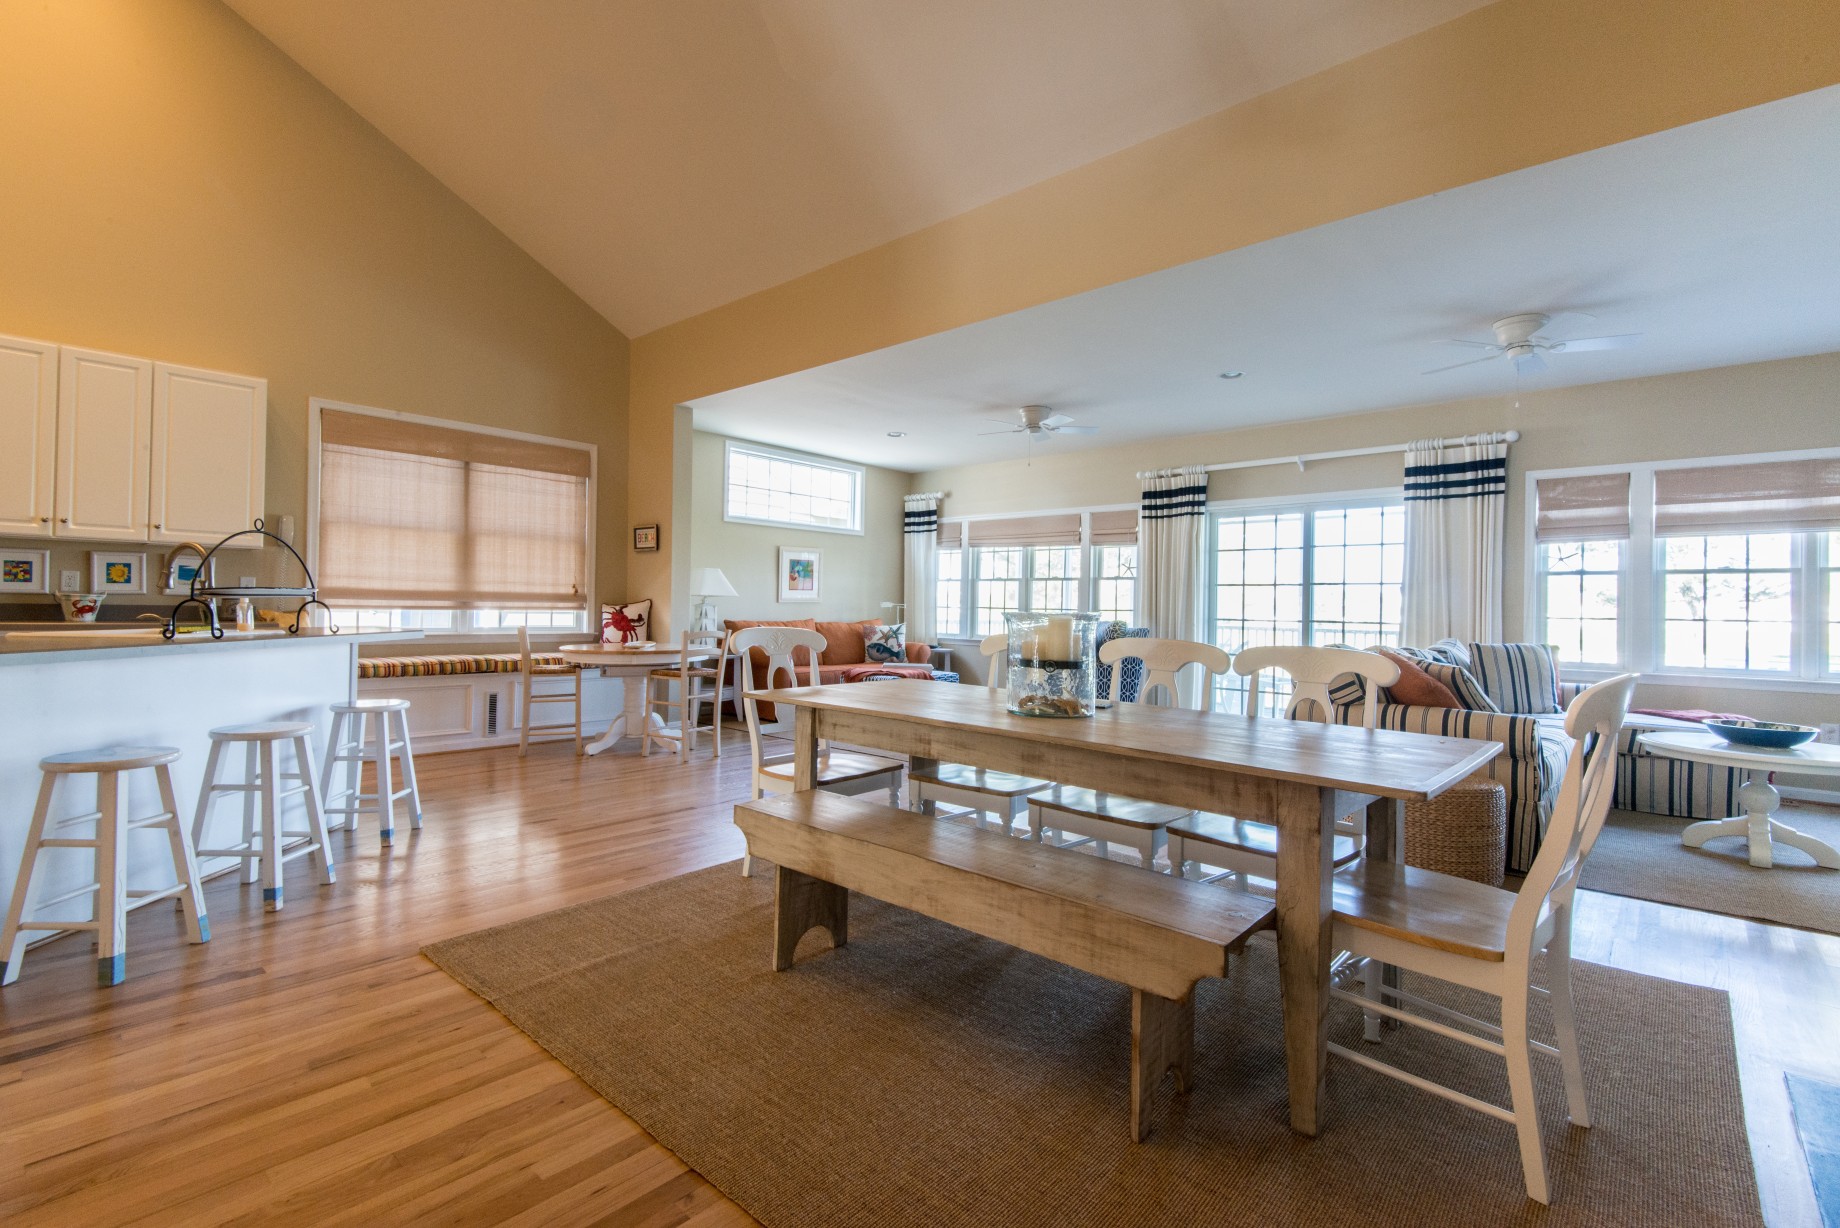 Willow Oak New Addition in Bear Trap Dunes, Ocean View DE Extended Family Room Dining Room Area with Wood Table and Hardwood Flooring